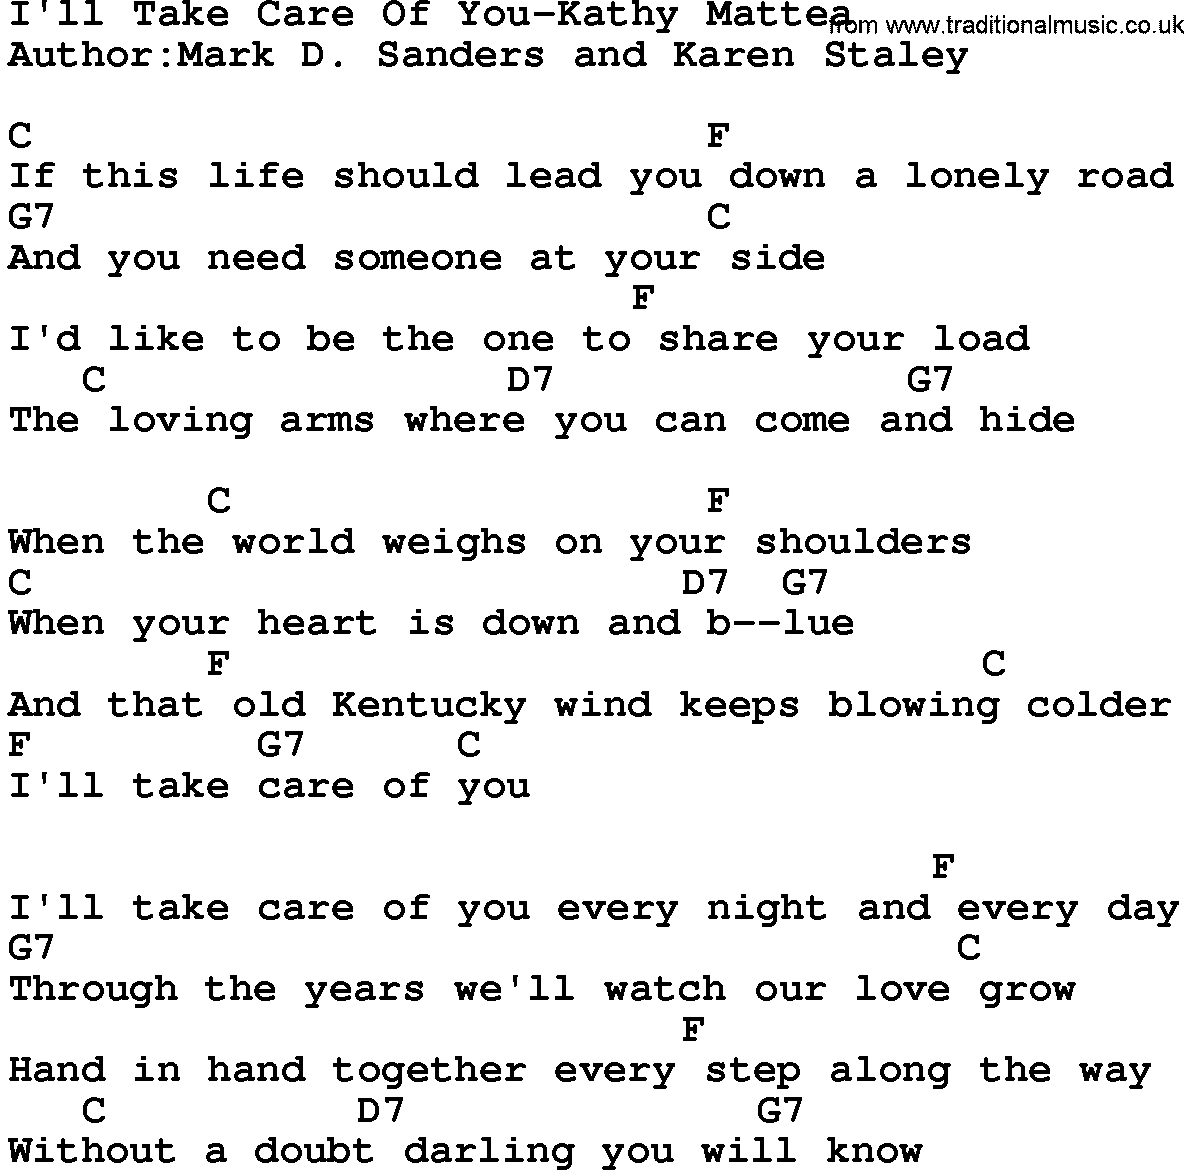 Country music song: I'll Take Care Of You-Kathy Mattea lyrics and chords